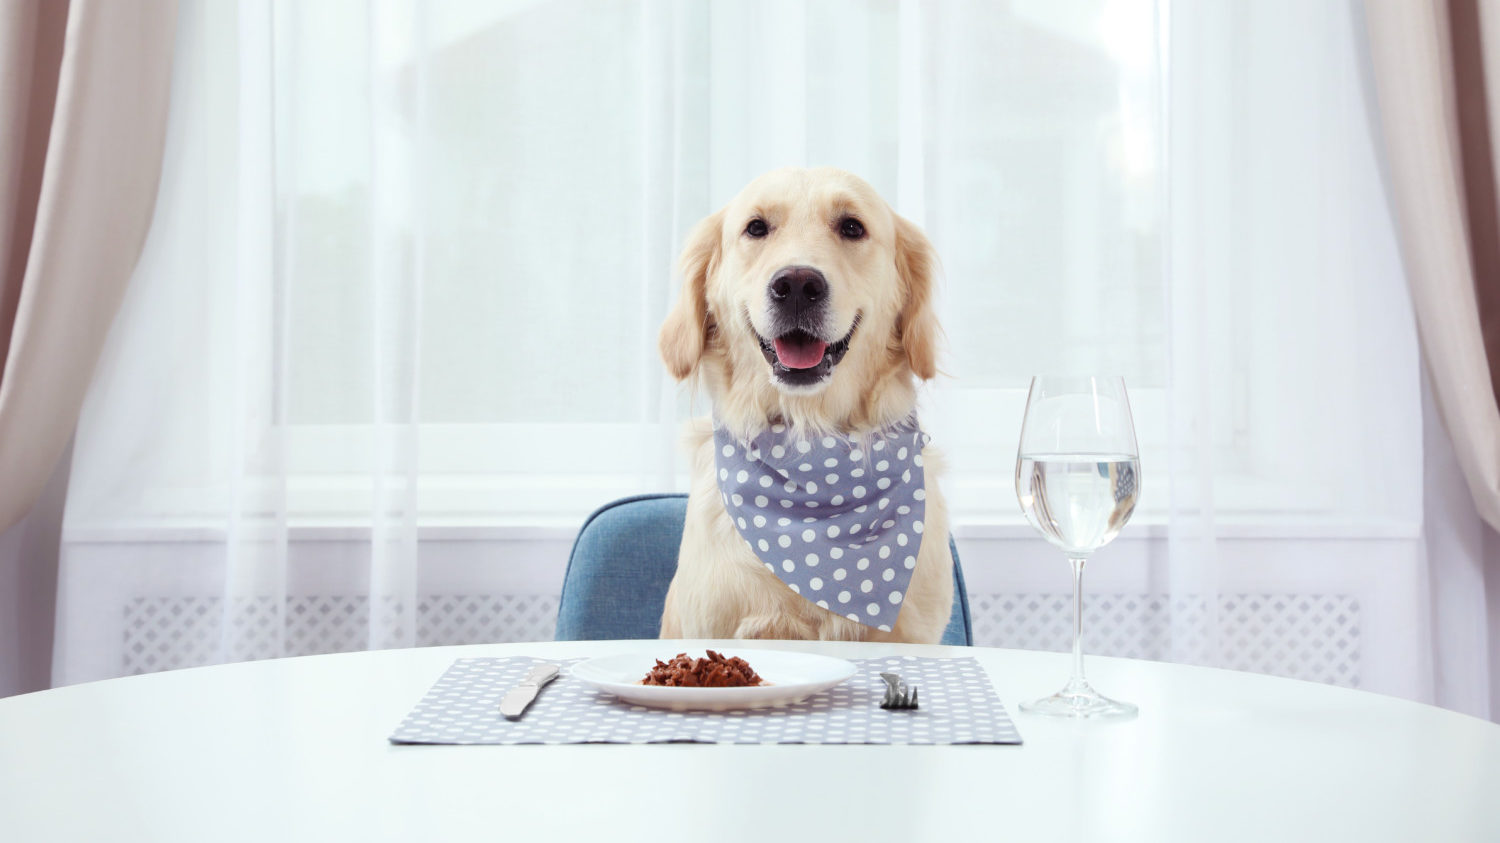 Dog fine dining at table